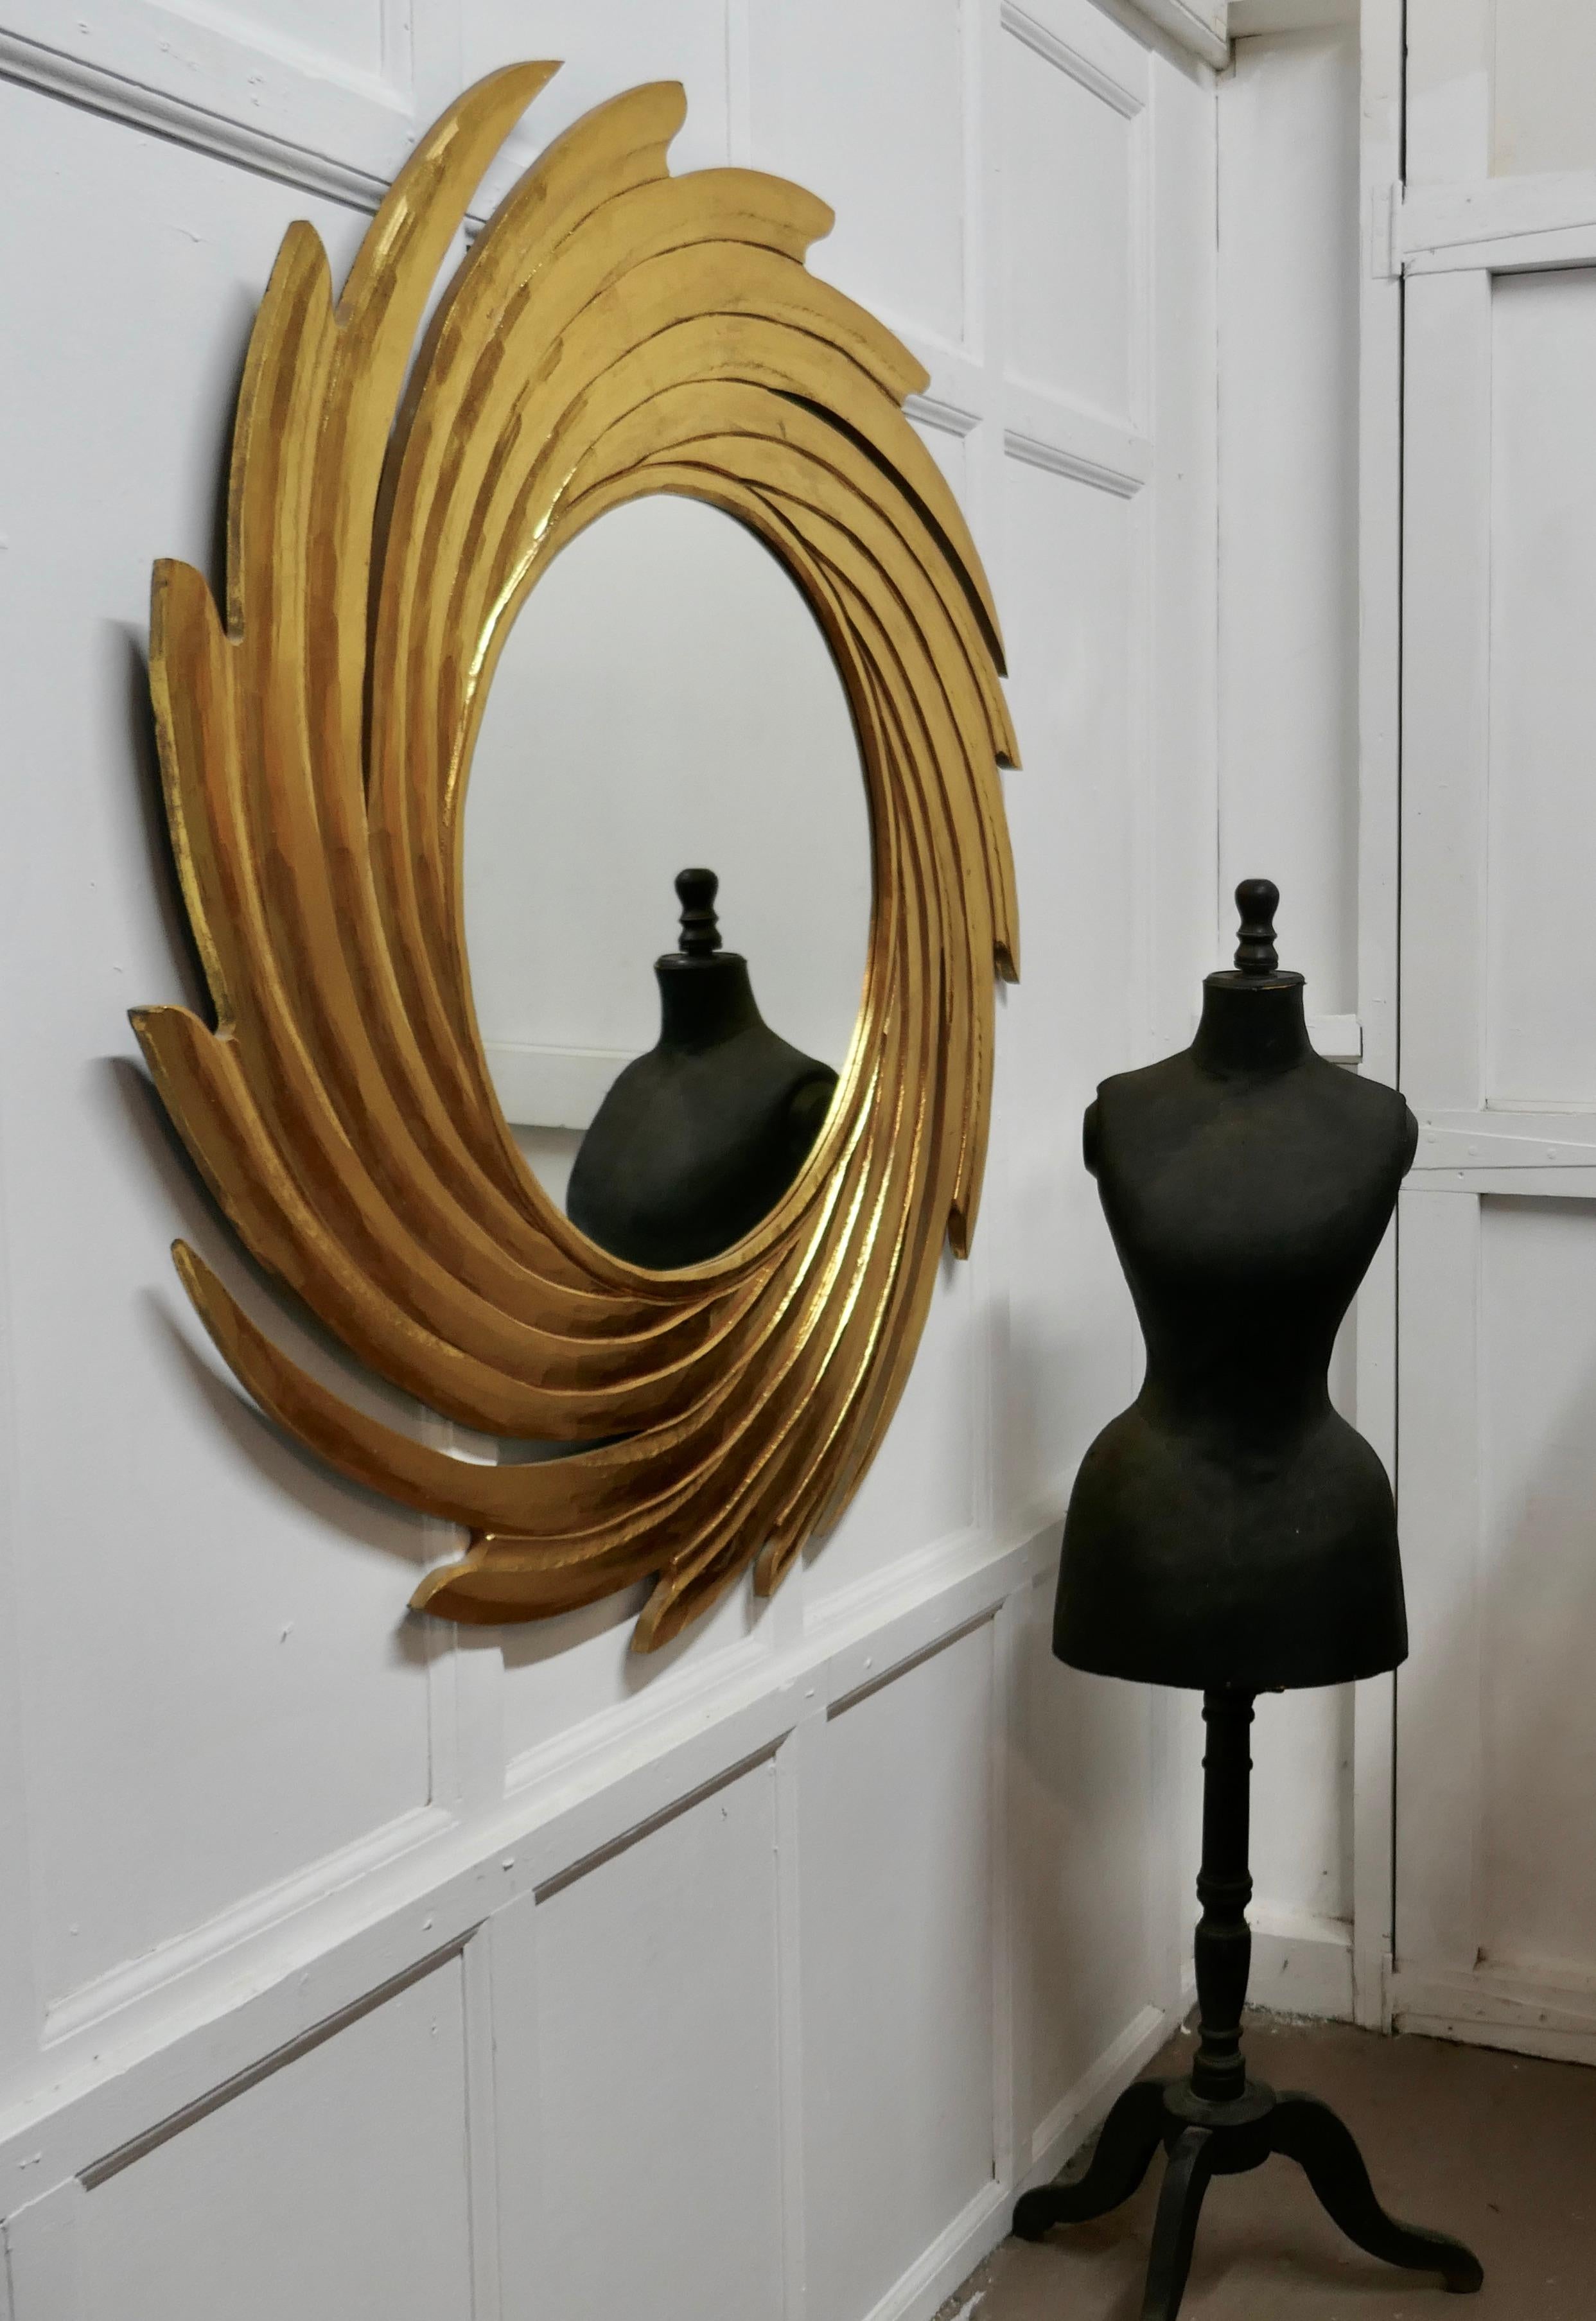 Huge carved sunburst swirl gilt mirror

A superb piece, made in the last century, the usual sunburst frame which is 12” wide radiates with out a swirl on this exciting piece
The mirror is in good vintage condition
The starburst is 48” in